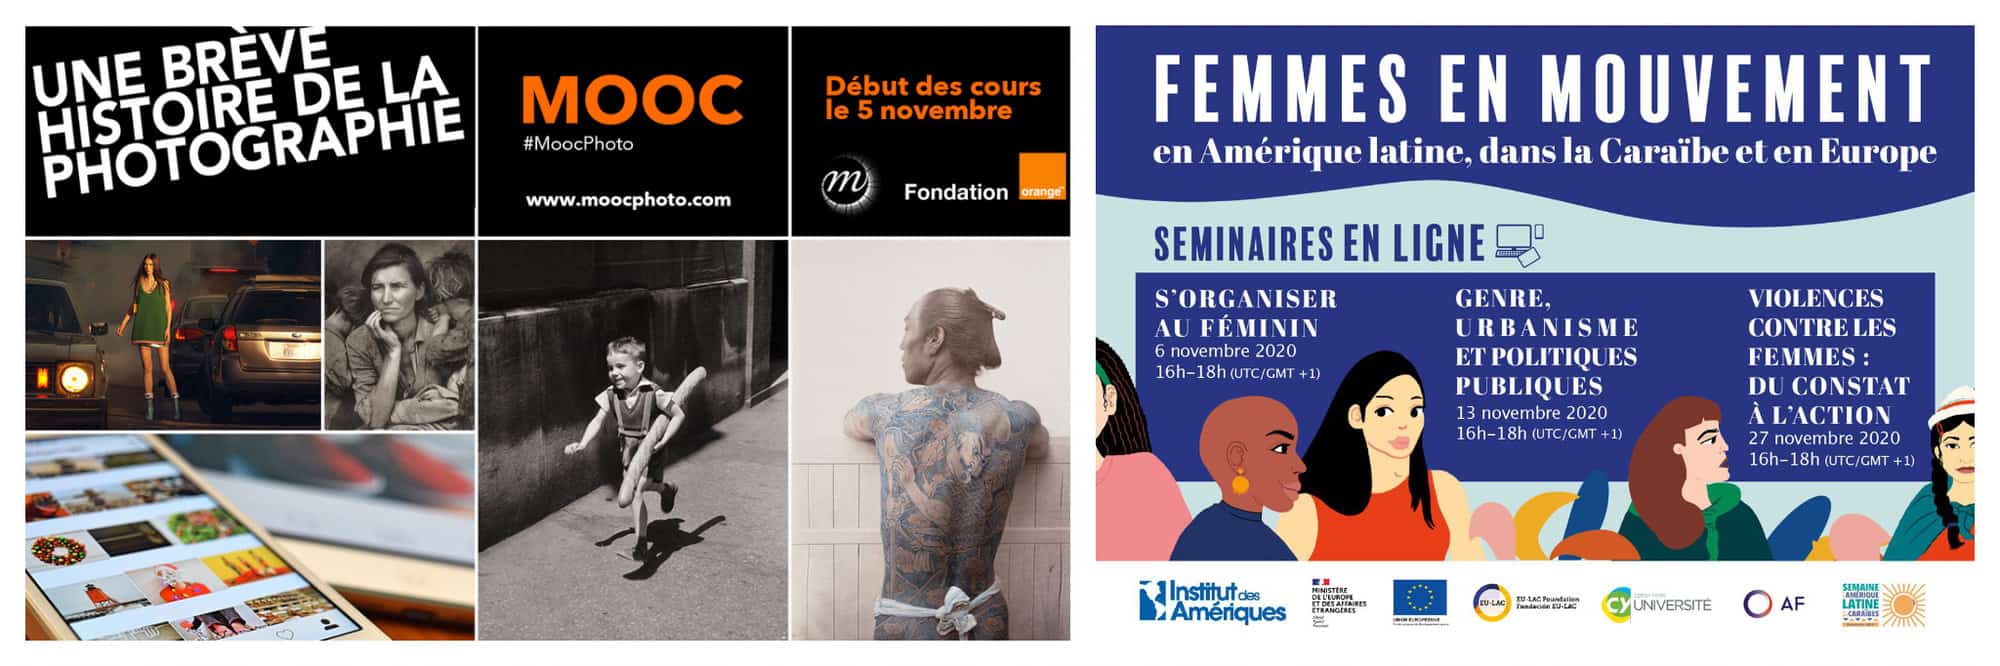 Left: advertisement for MOOC photo. In the left corner the words "Une brève histoire de la photographie" is written in white in French and there are other French words in orange with the start date of November 5 at the top. There are various photos advertised. Right: advertisement for "femmes en mouvement." There are several illustration of different women